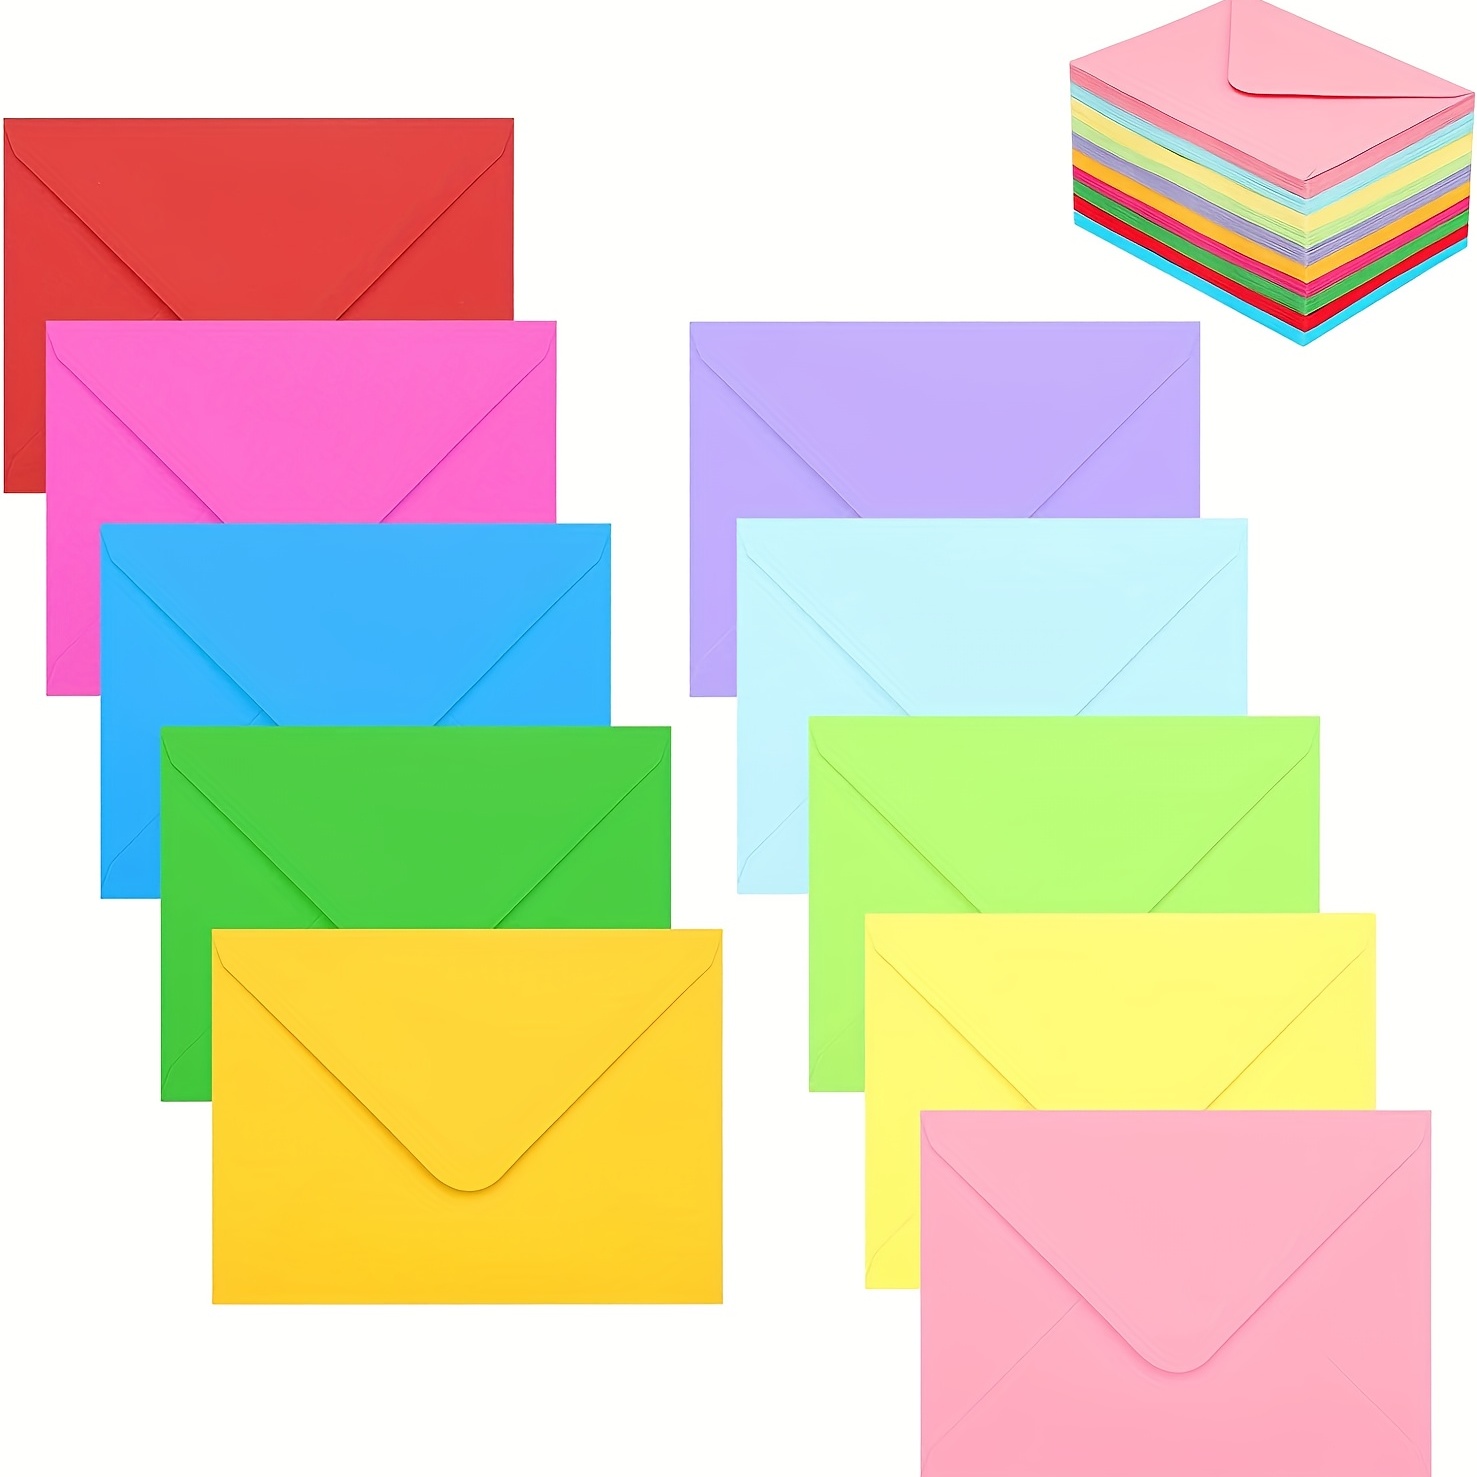 Assorted Multi Colors 25 Pack A7 Envelopes for 5 x 7 Greeting Cards Invitation Wedding Announcement from The Envelope Gallery